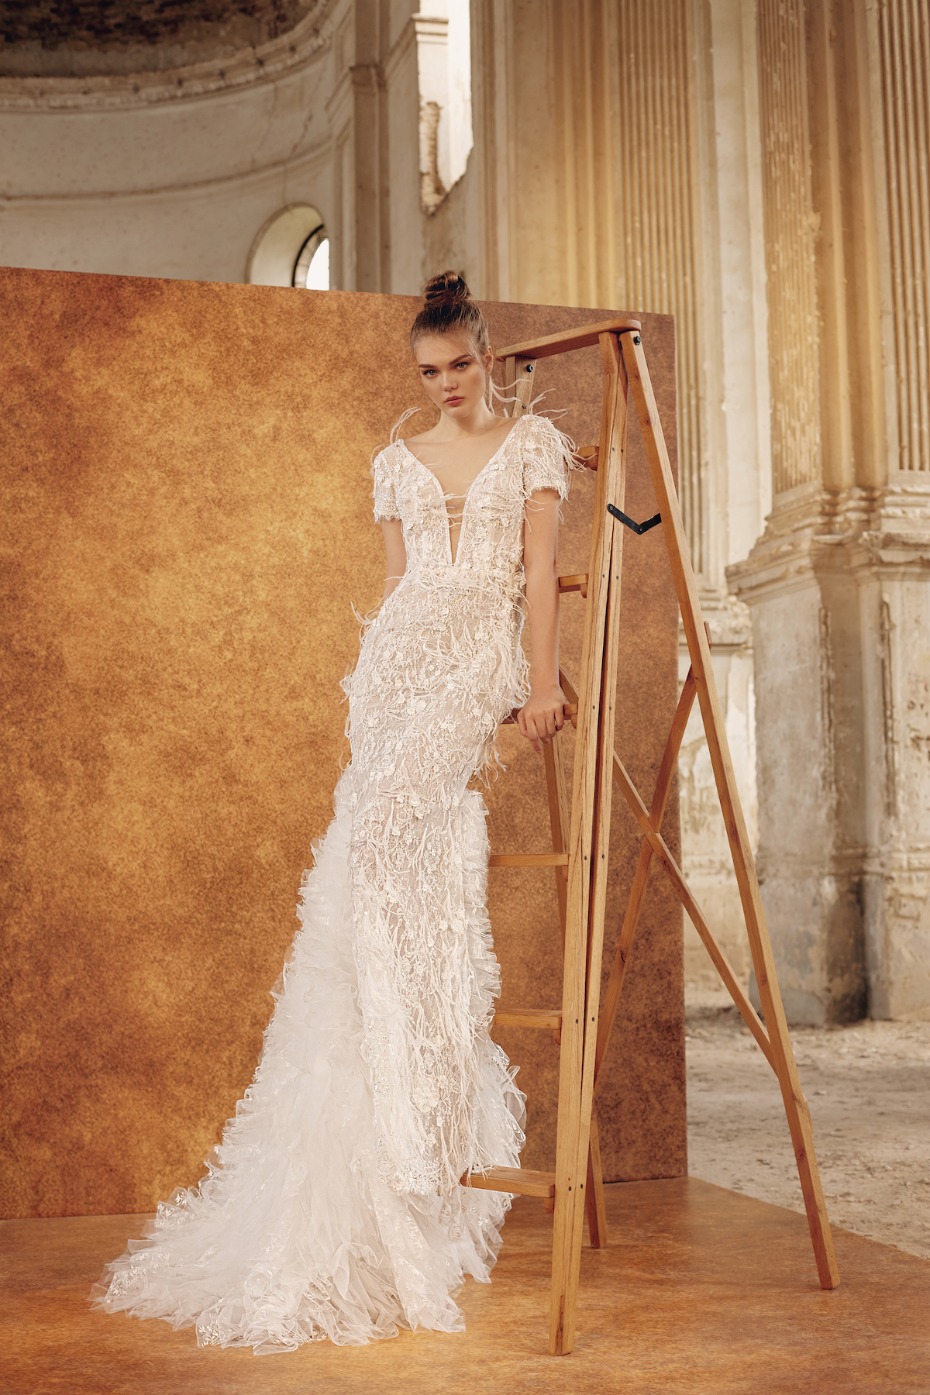 These Wedding Dresses Are Legit Love In Fashion Form